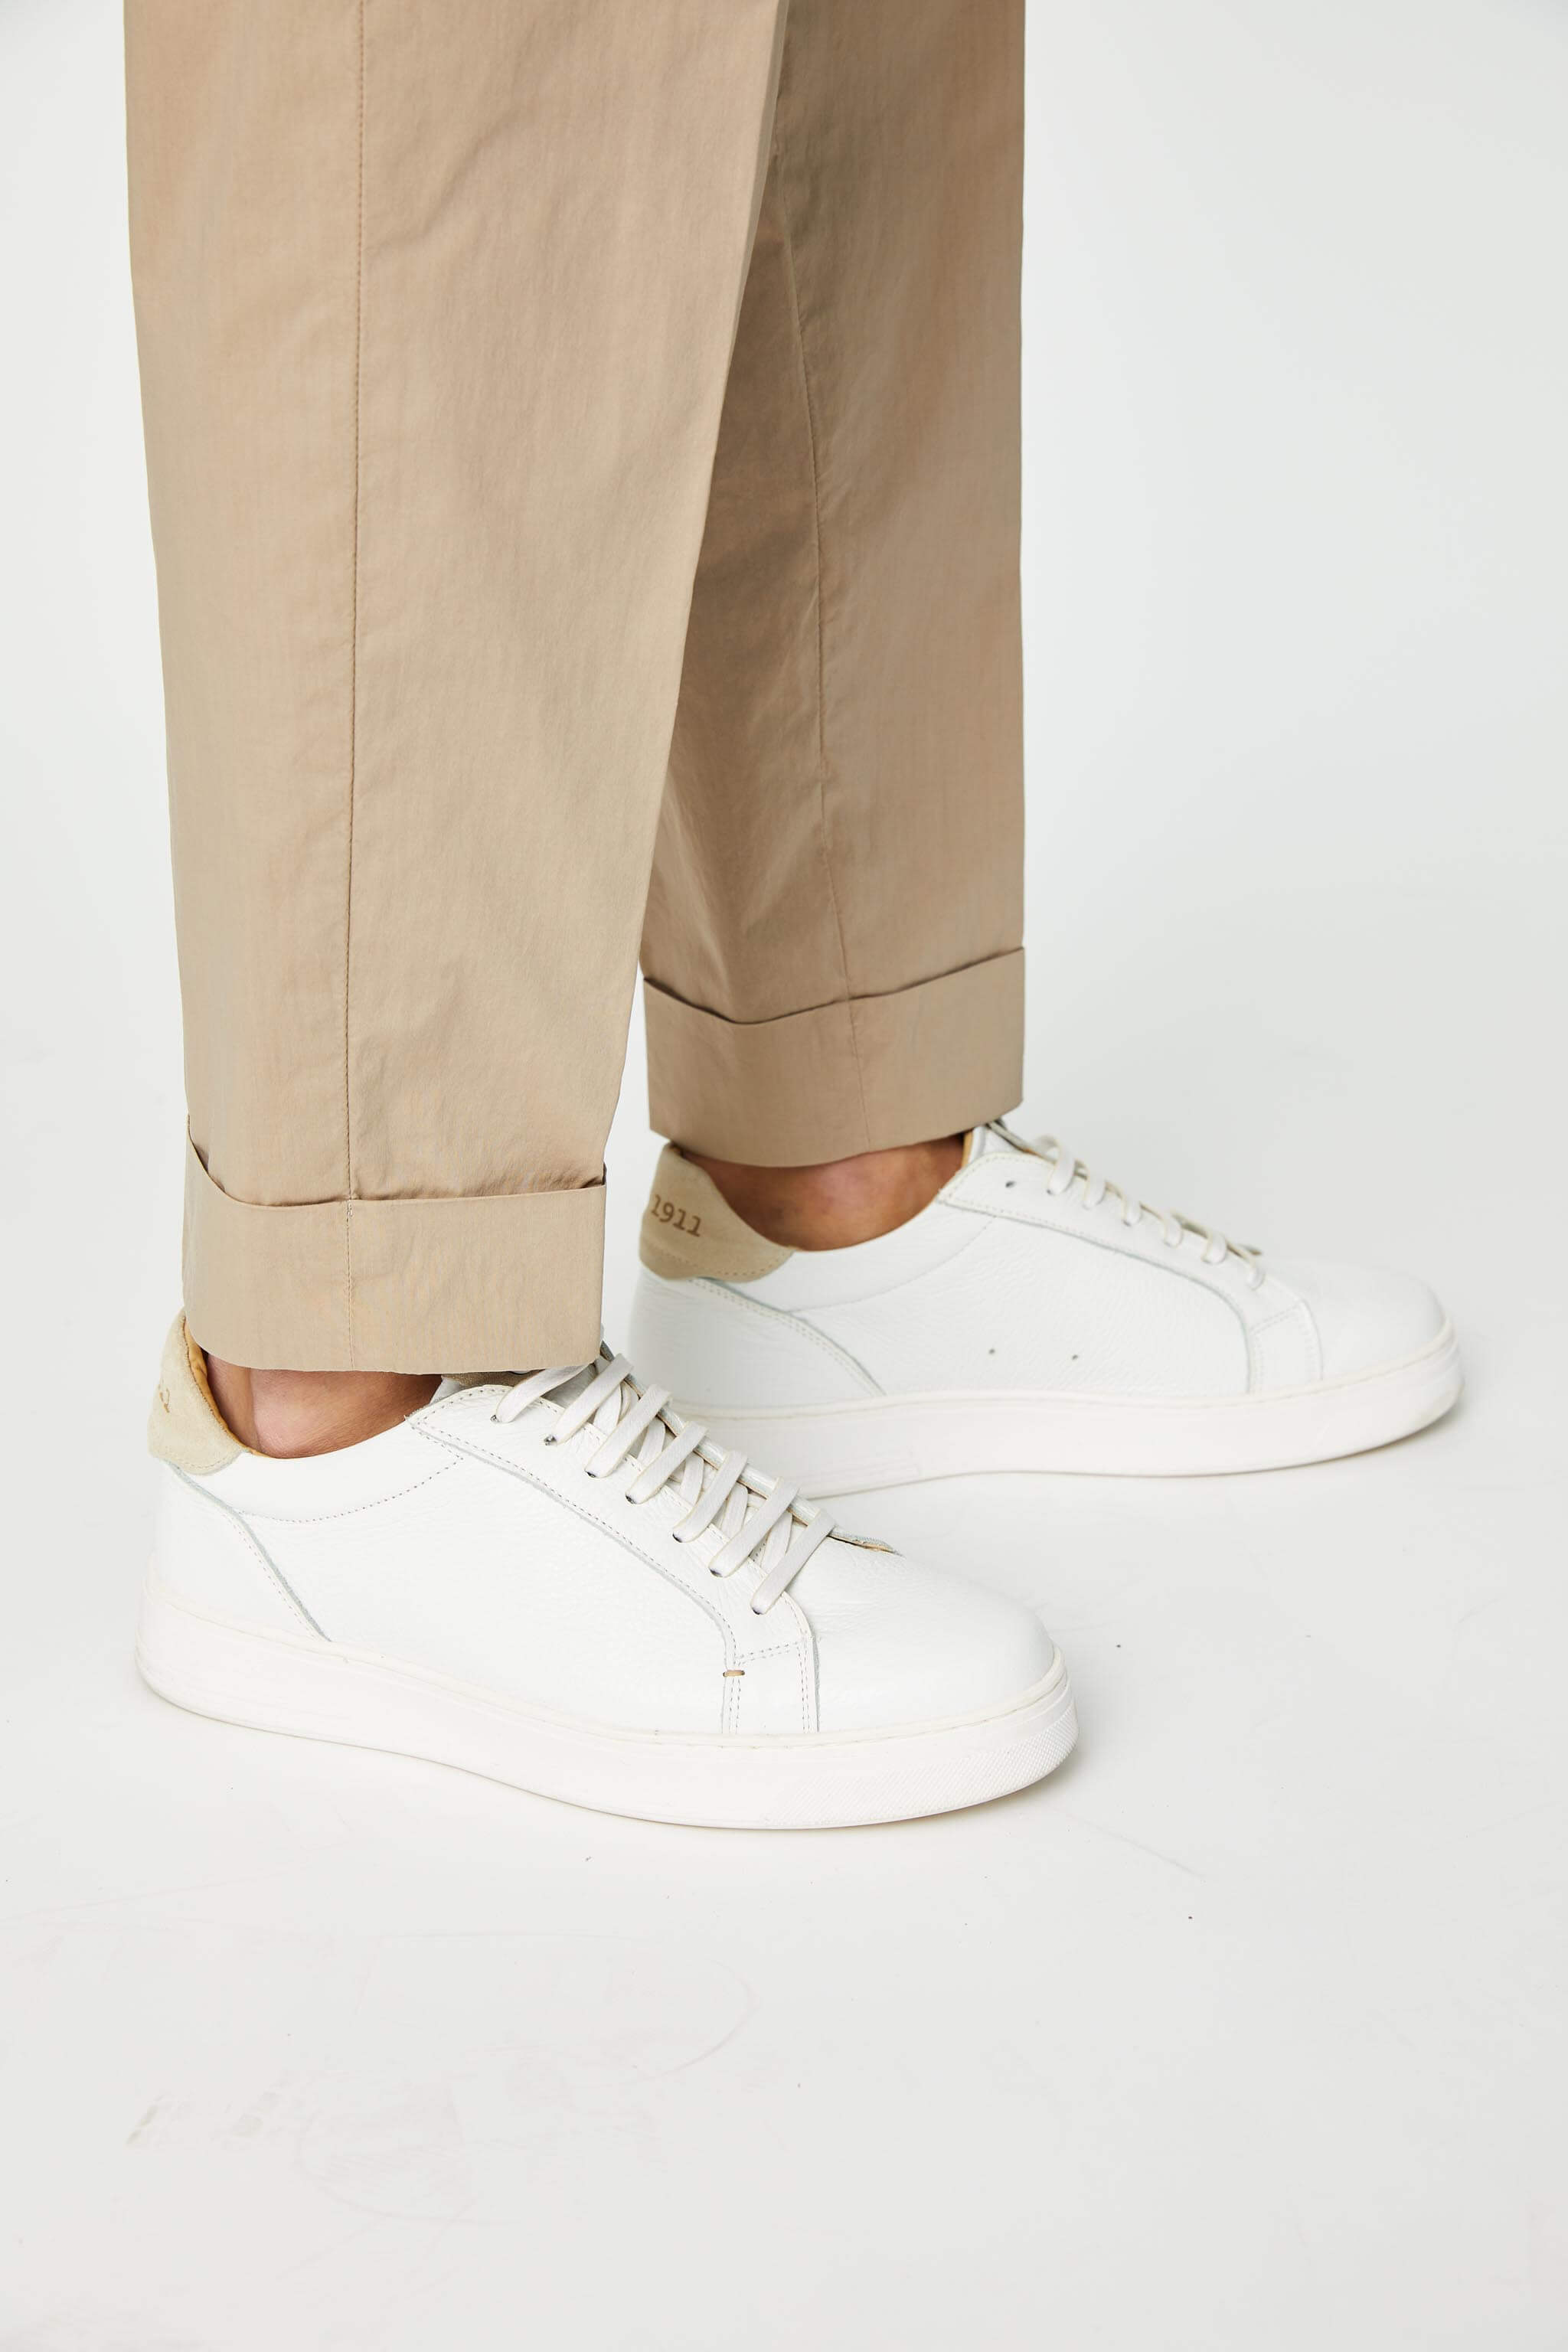 Garment-dyed LESTER pants in beige